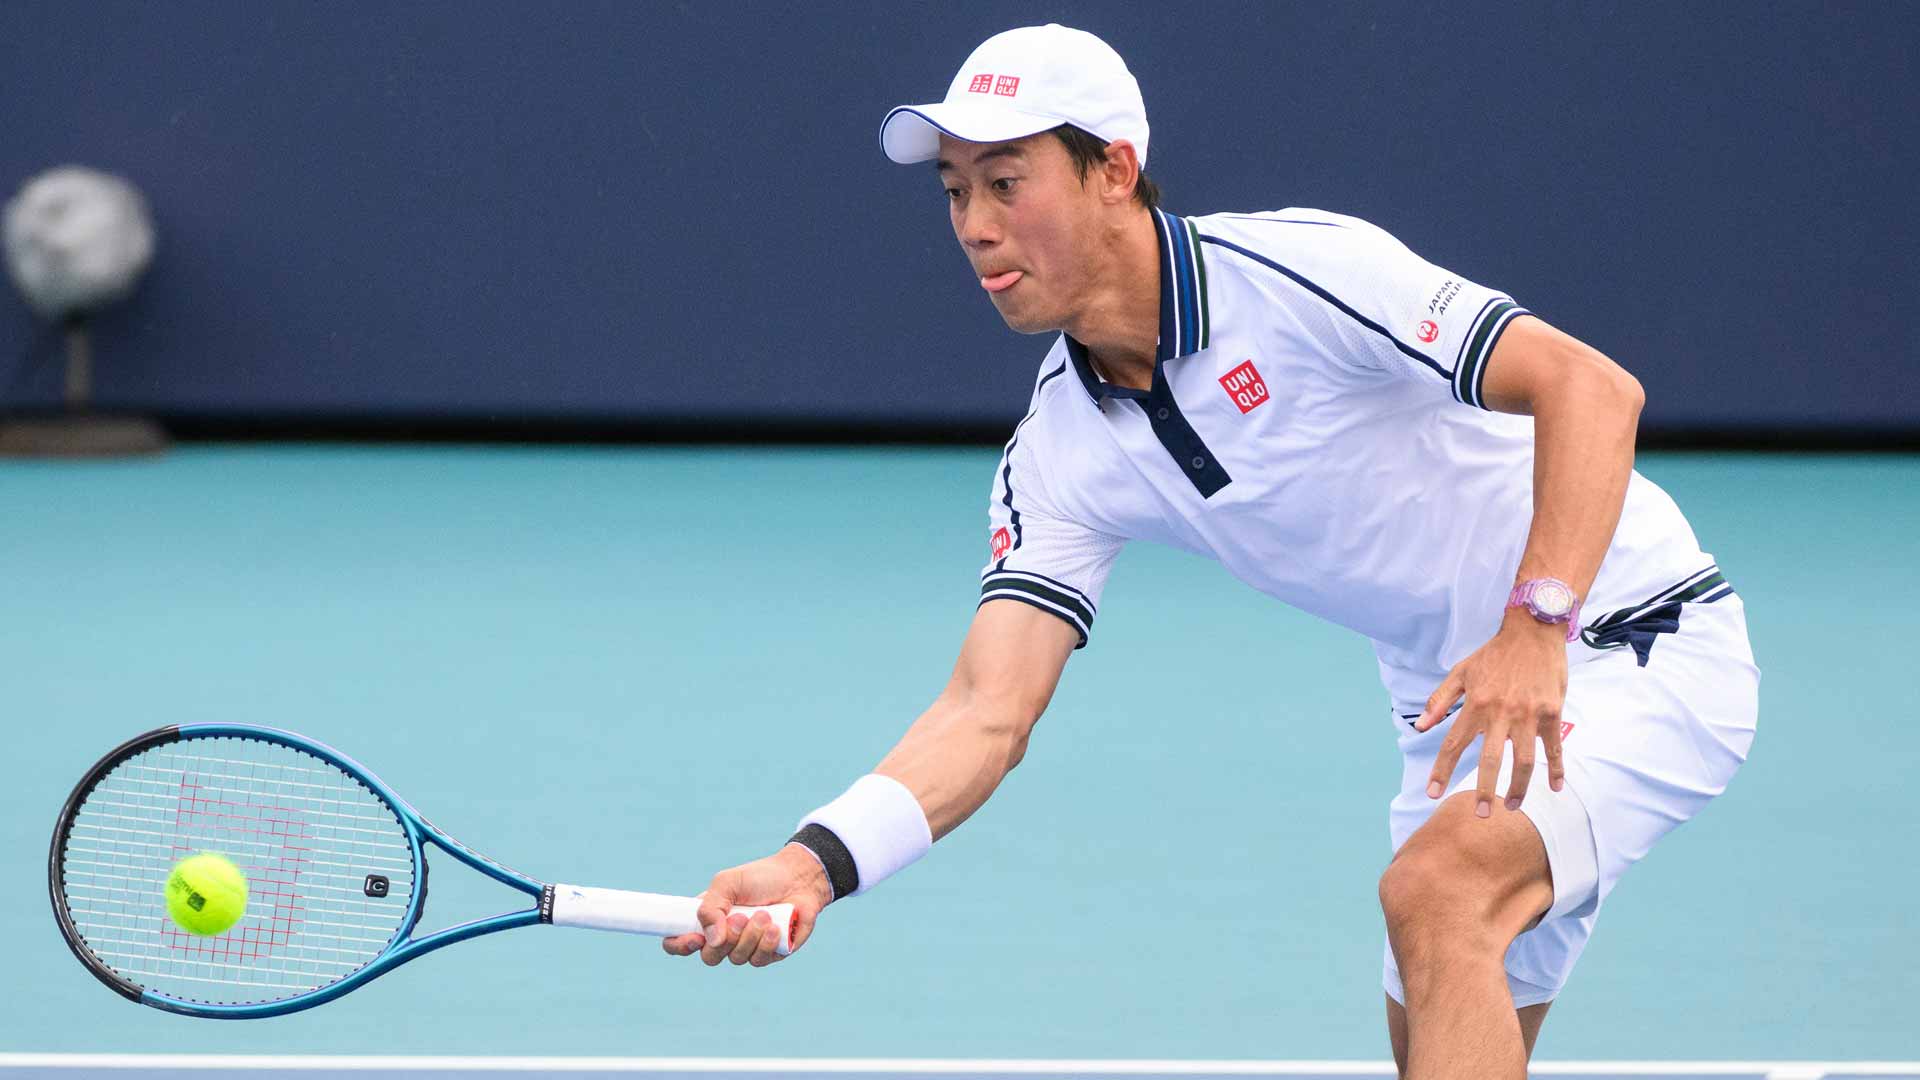 Kei Nishikori in action Thursday in Miami, where he was playing his first match since last July.